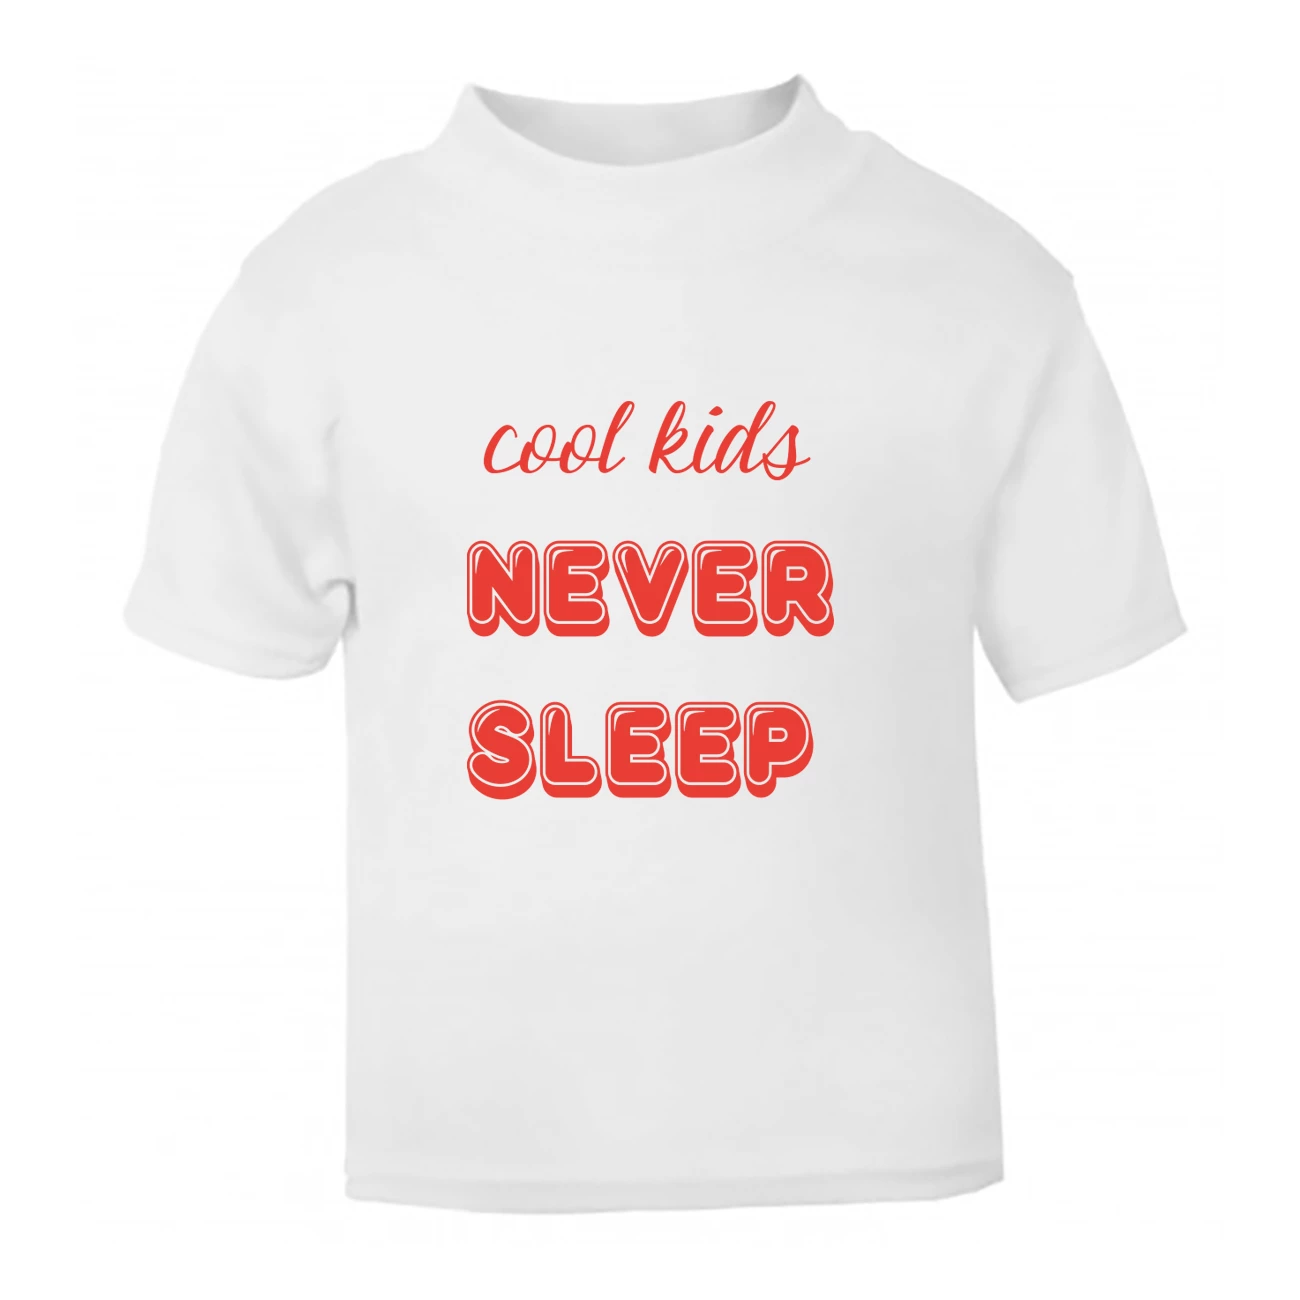 cool kids never sleep, t-shirt for toddlers